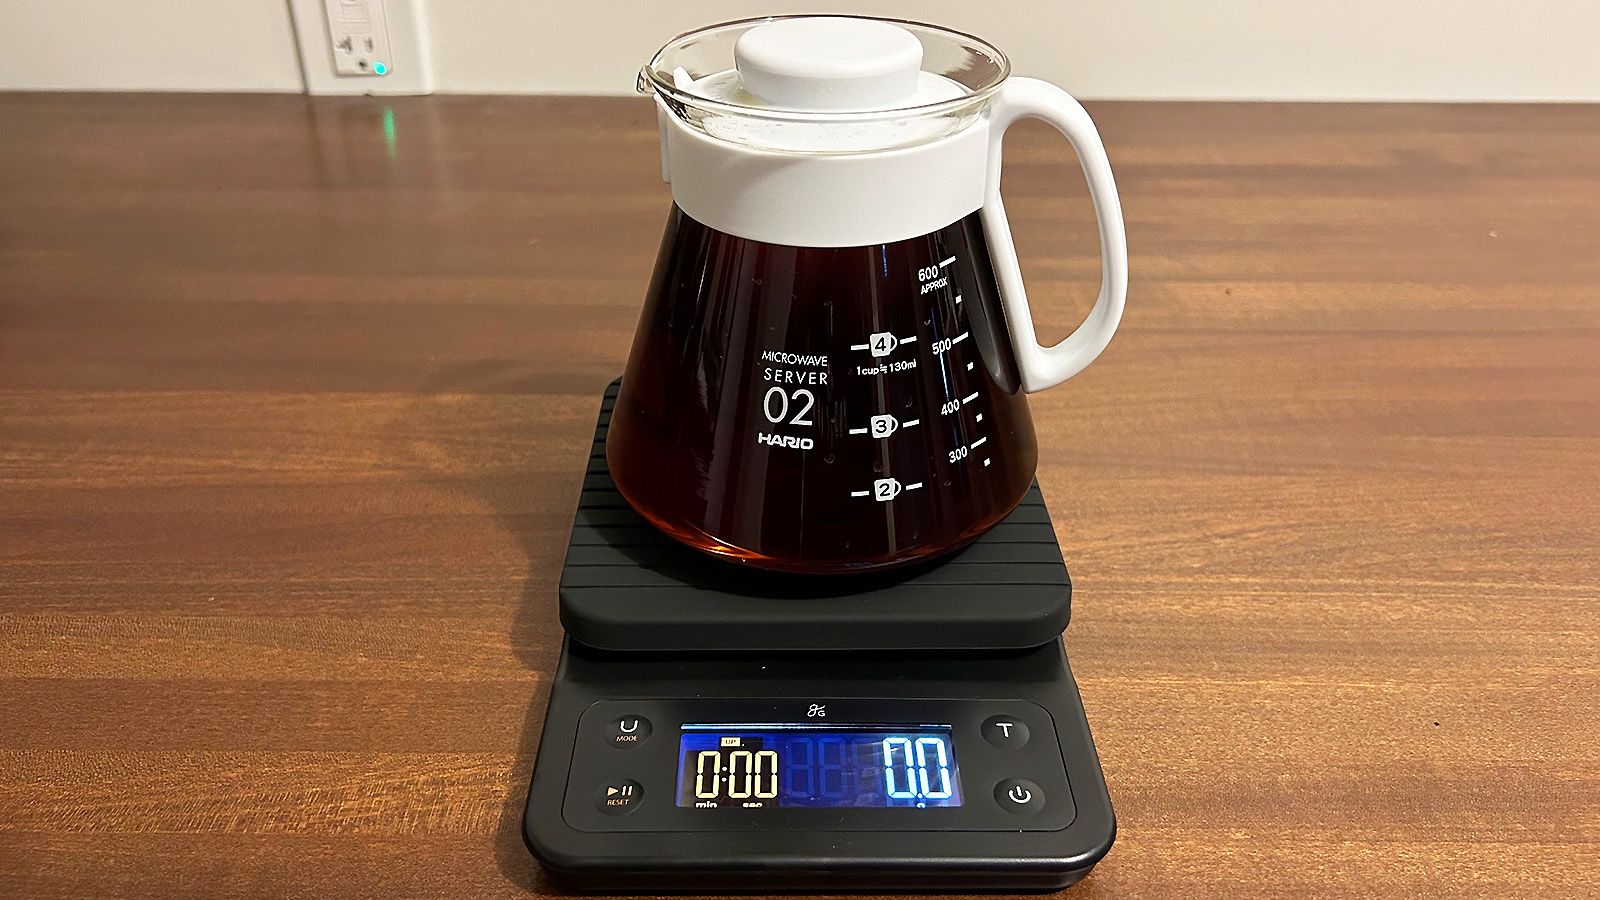 The best coffee scales in 2023, tried and tested